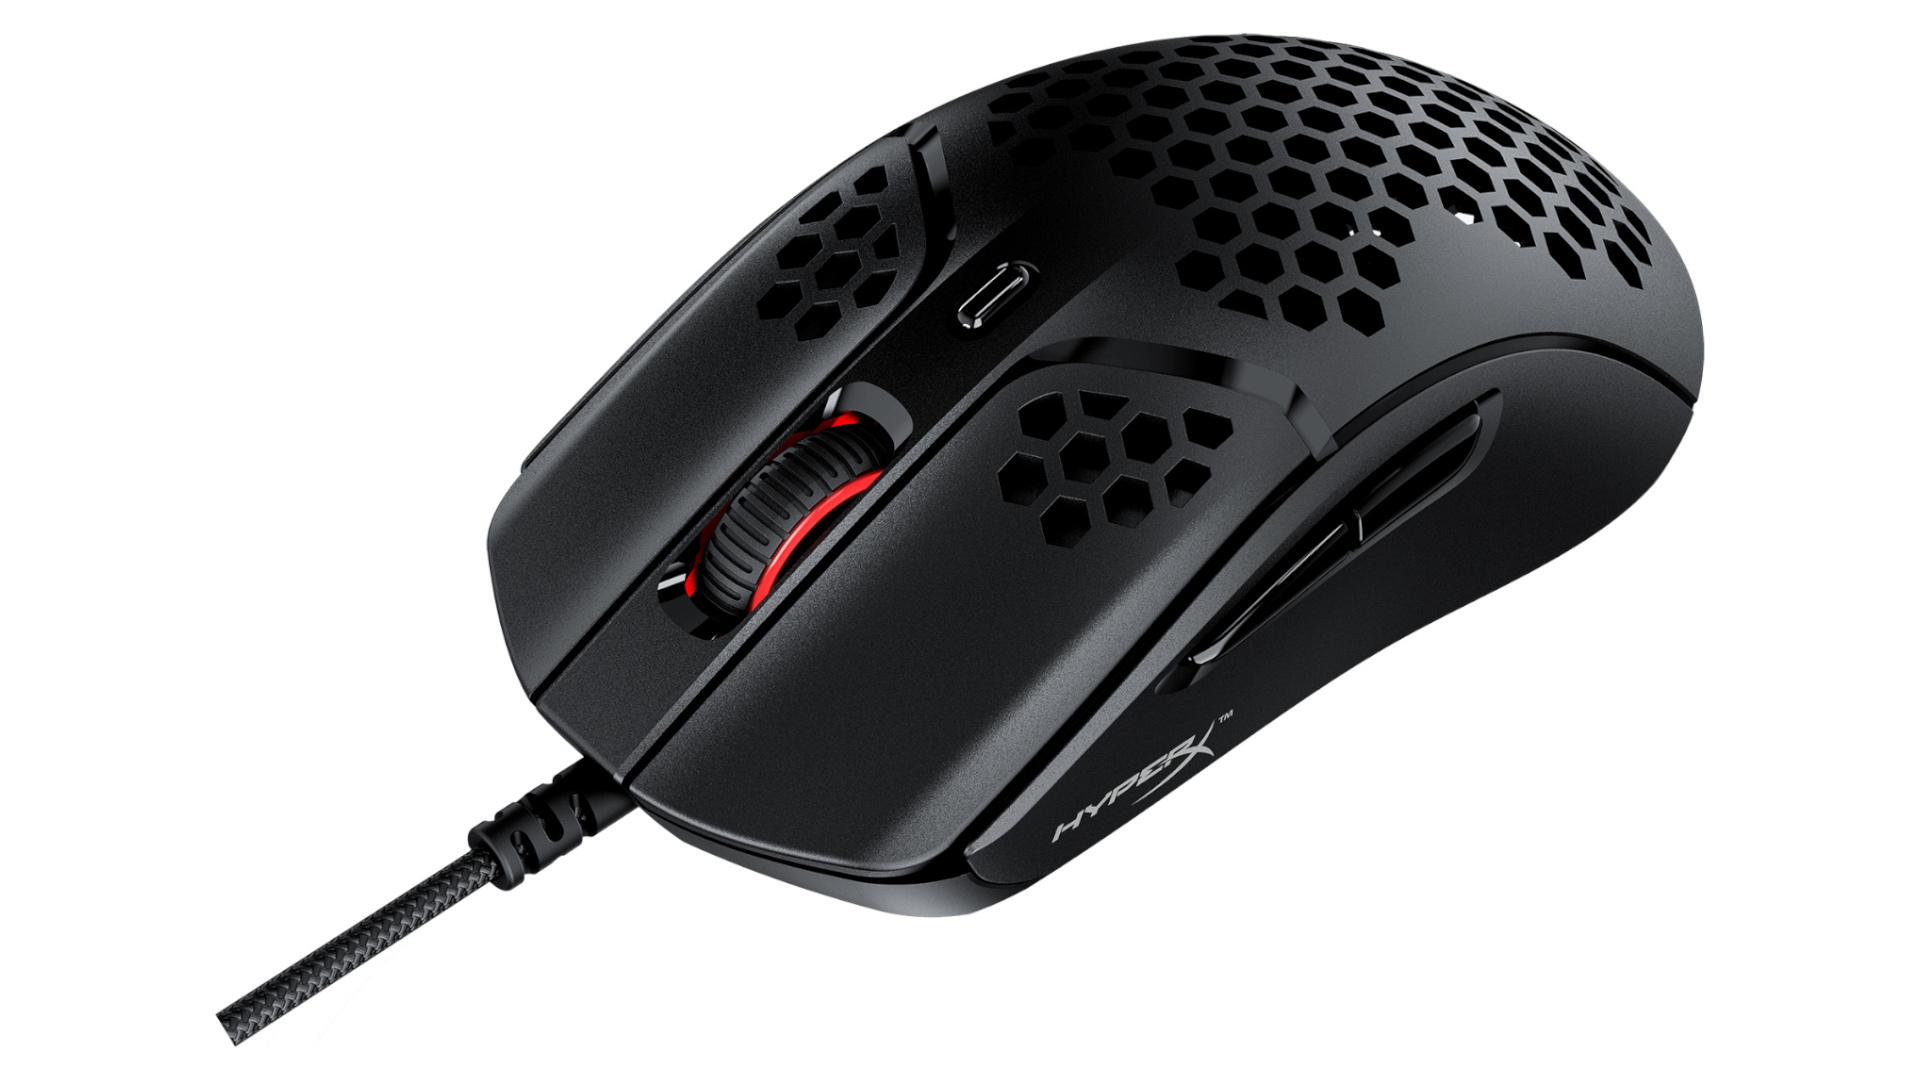 HyperX Pulsefire Haste gaming mouse